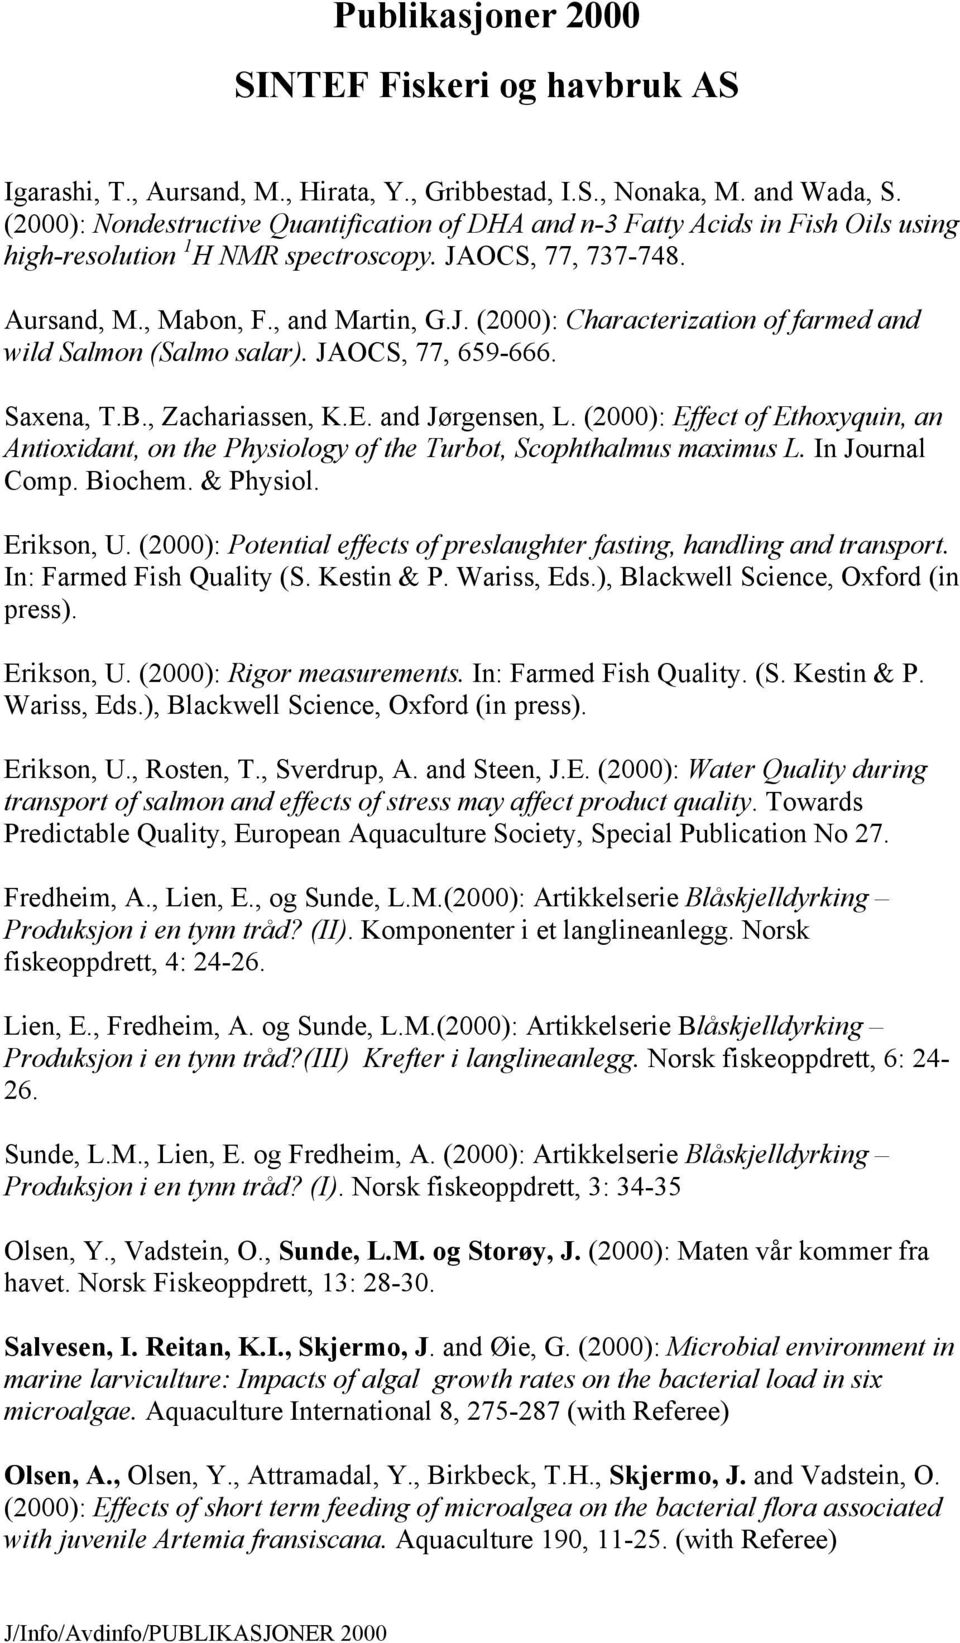 JAOCS, 77, 659-666. Saxena, T.B., Zachariassen, K.E. and Jørgensen, L. (2000): Effect of Ethoxyquin, an Antioxidant, on the Physiology of the Turbot, Scophthalmus maximus L. In Journal Comp. Biochem.